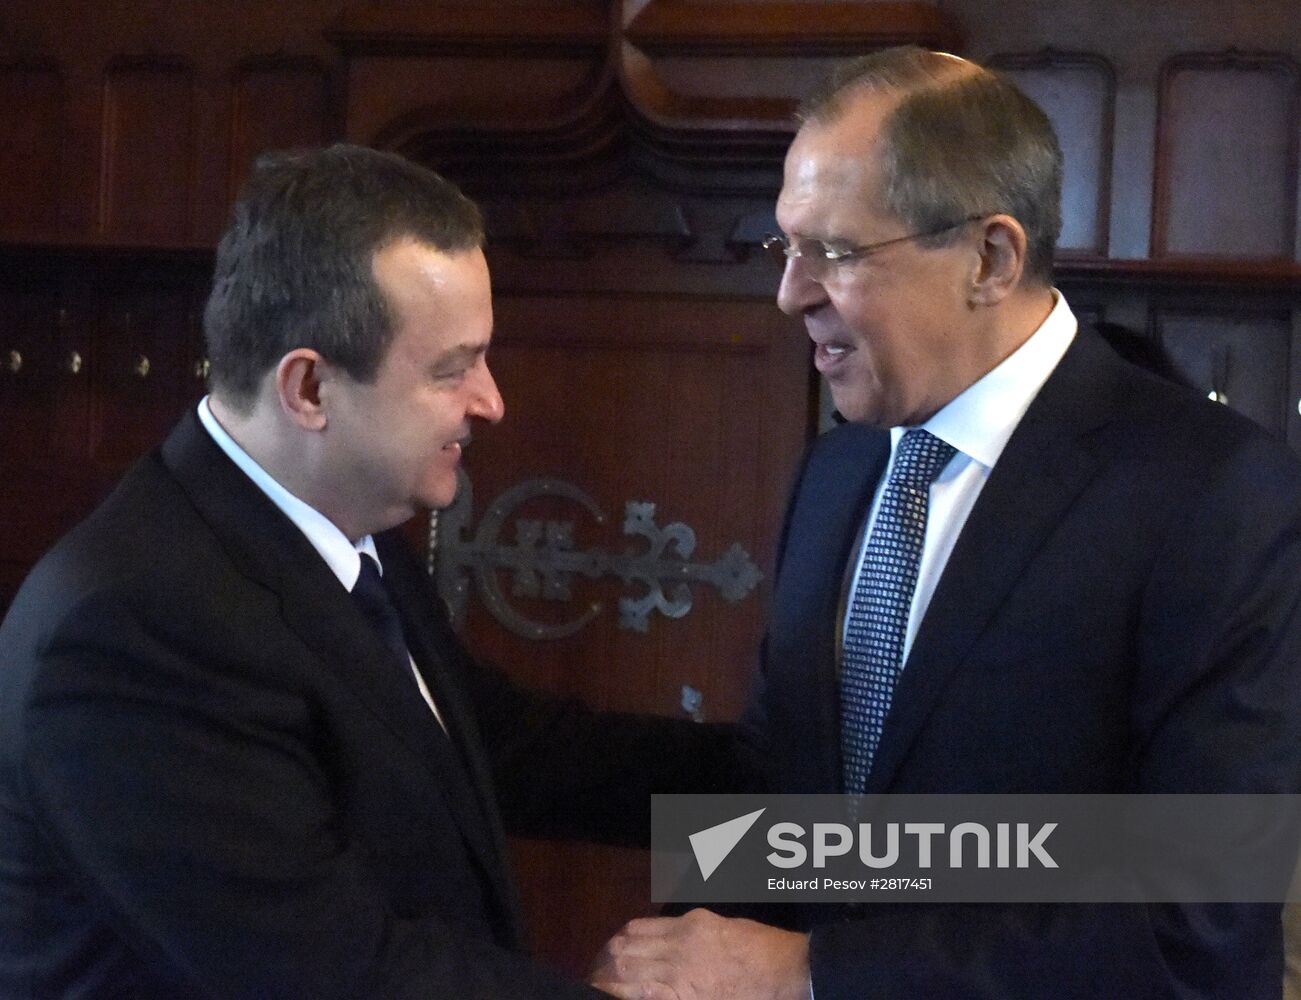 Sergei Lavrov meets with Serbian Foreign Minister Ivica Dacic